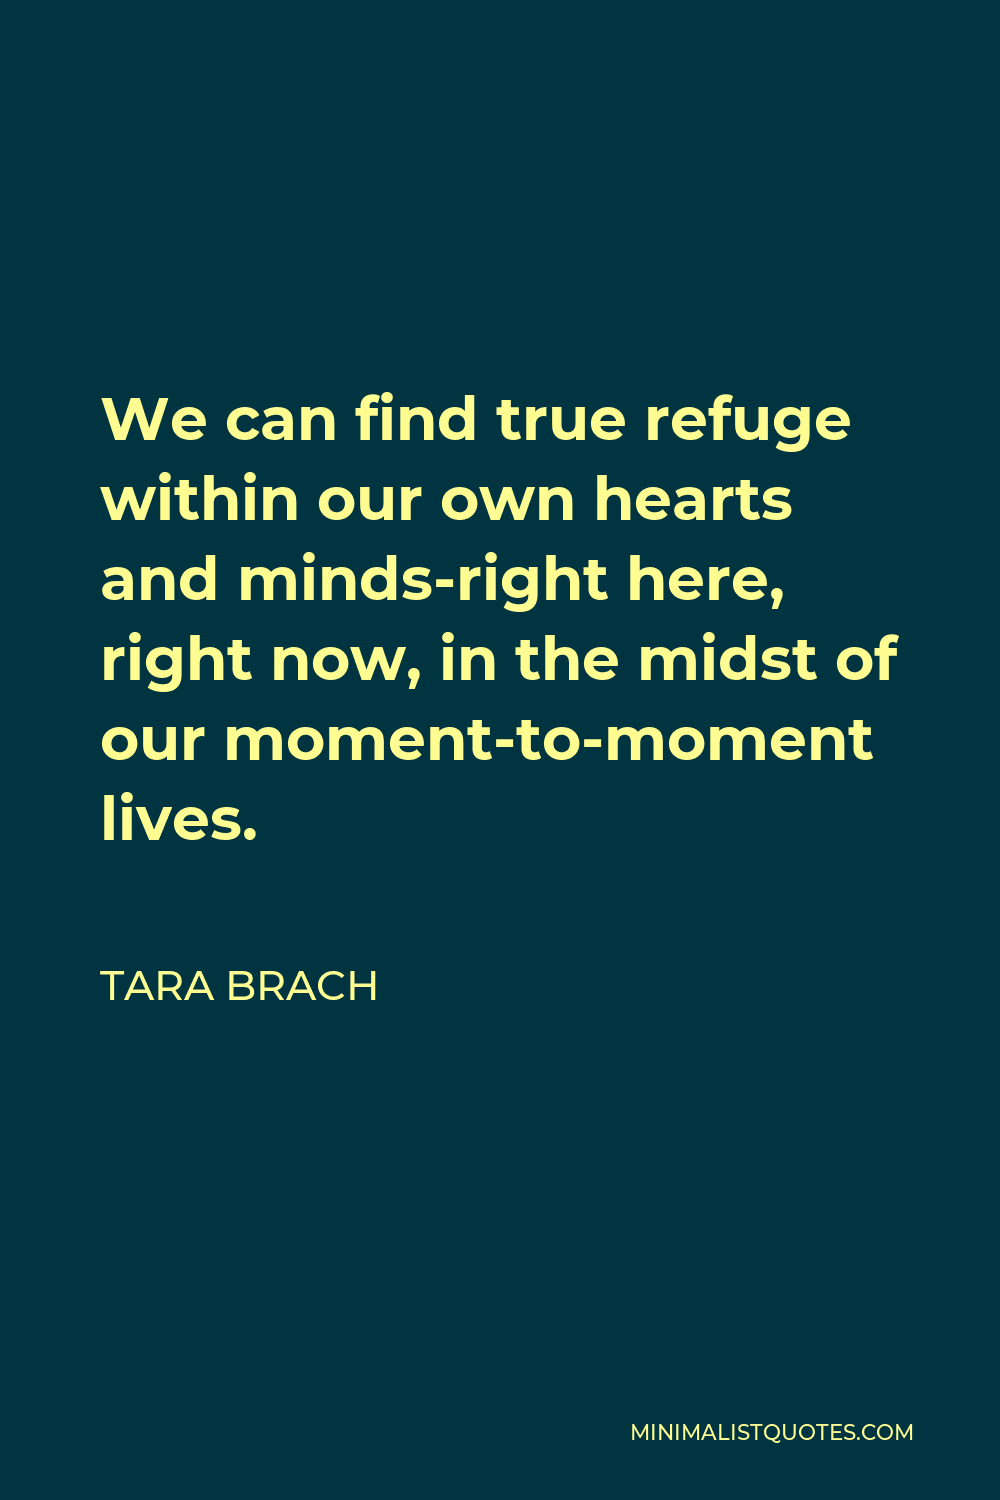 Tara Brach Quote - We can find true refuge within our own hearts and minds-right here, right now, in the midst of our moment-to-moment lives.